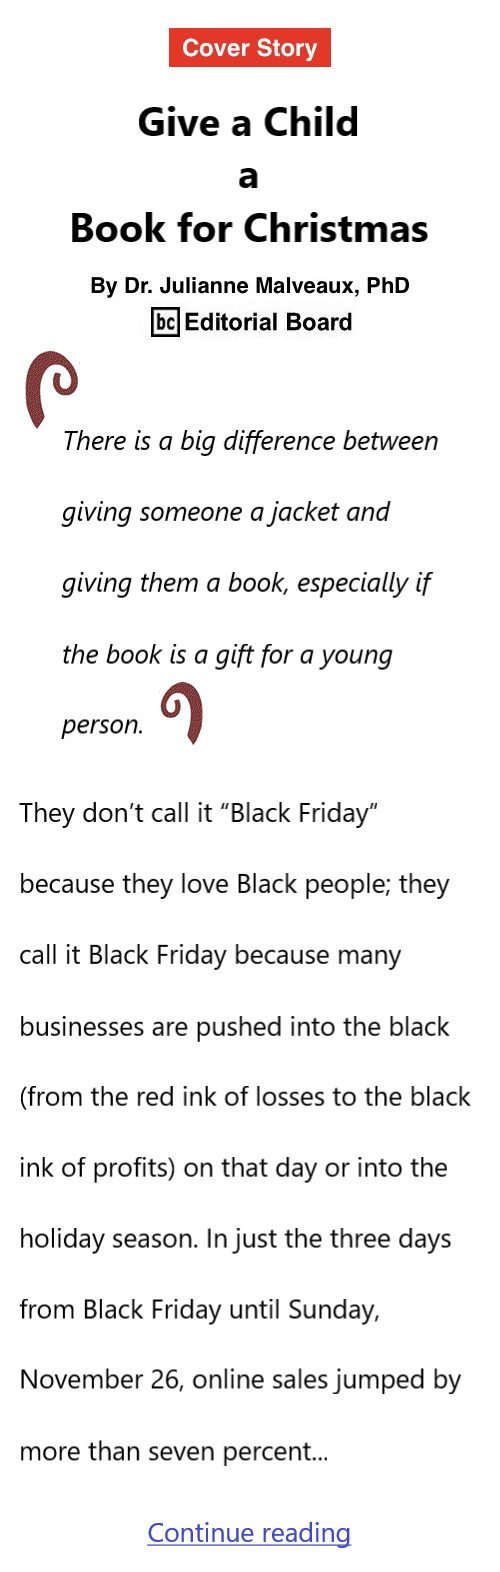 BlackCommentator.com Dec 7, 2023 - Issue 981: Cover Story - Give a Child a Book for Christmas By Dr. Julianne Malveaux, PhD, BC Editorial Board